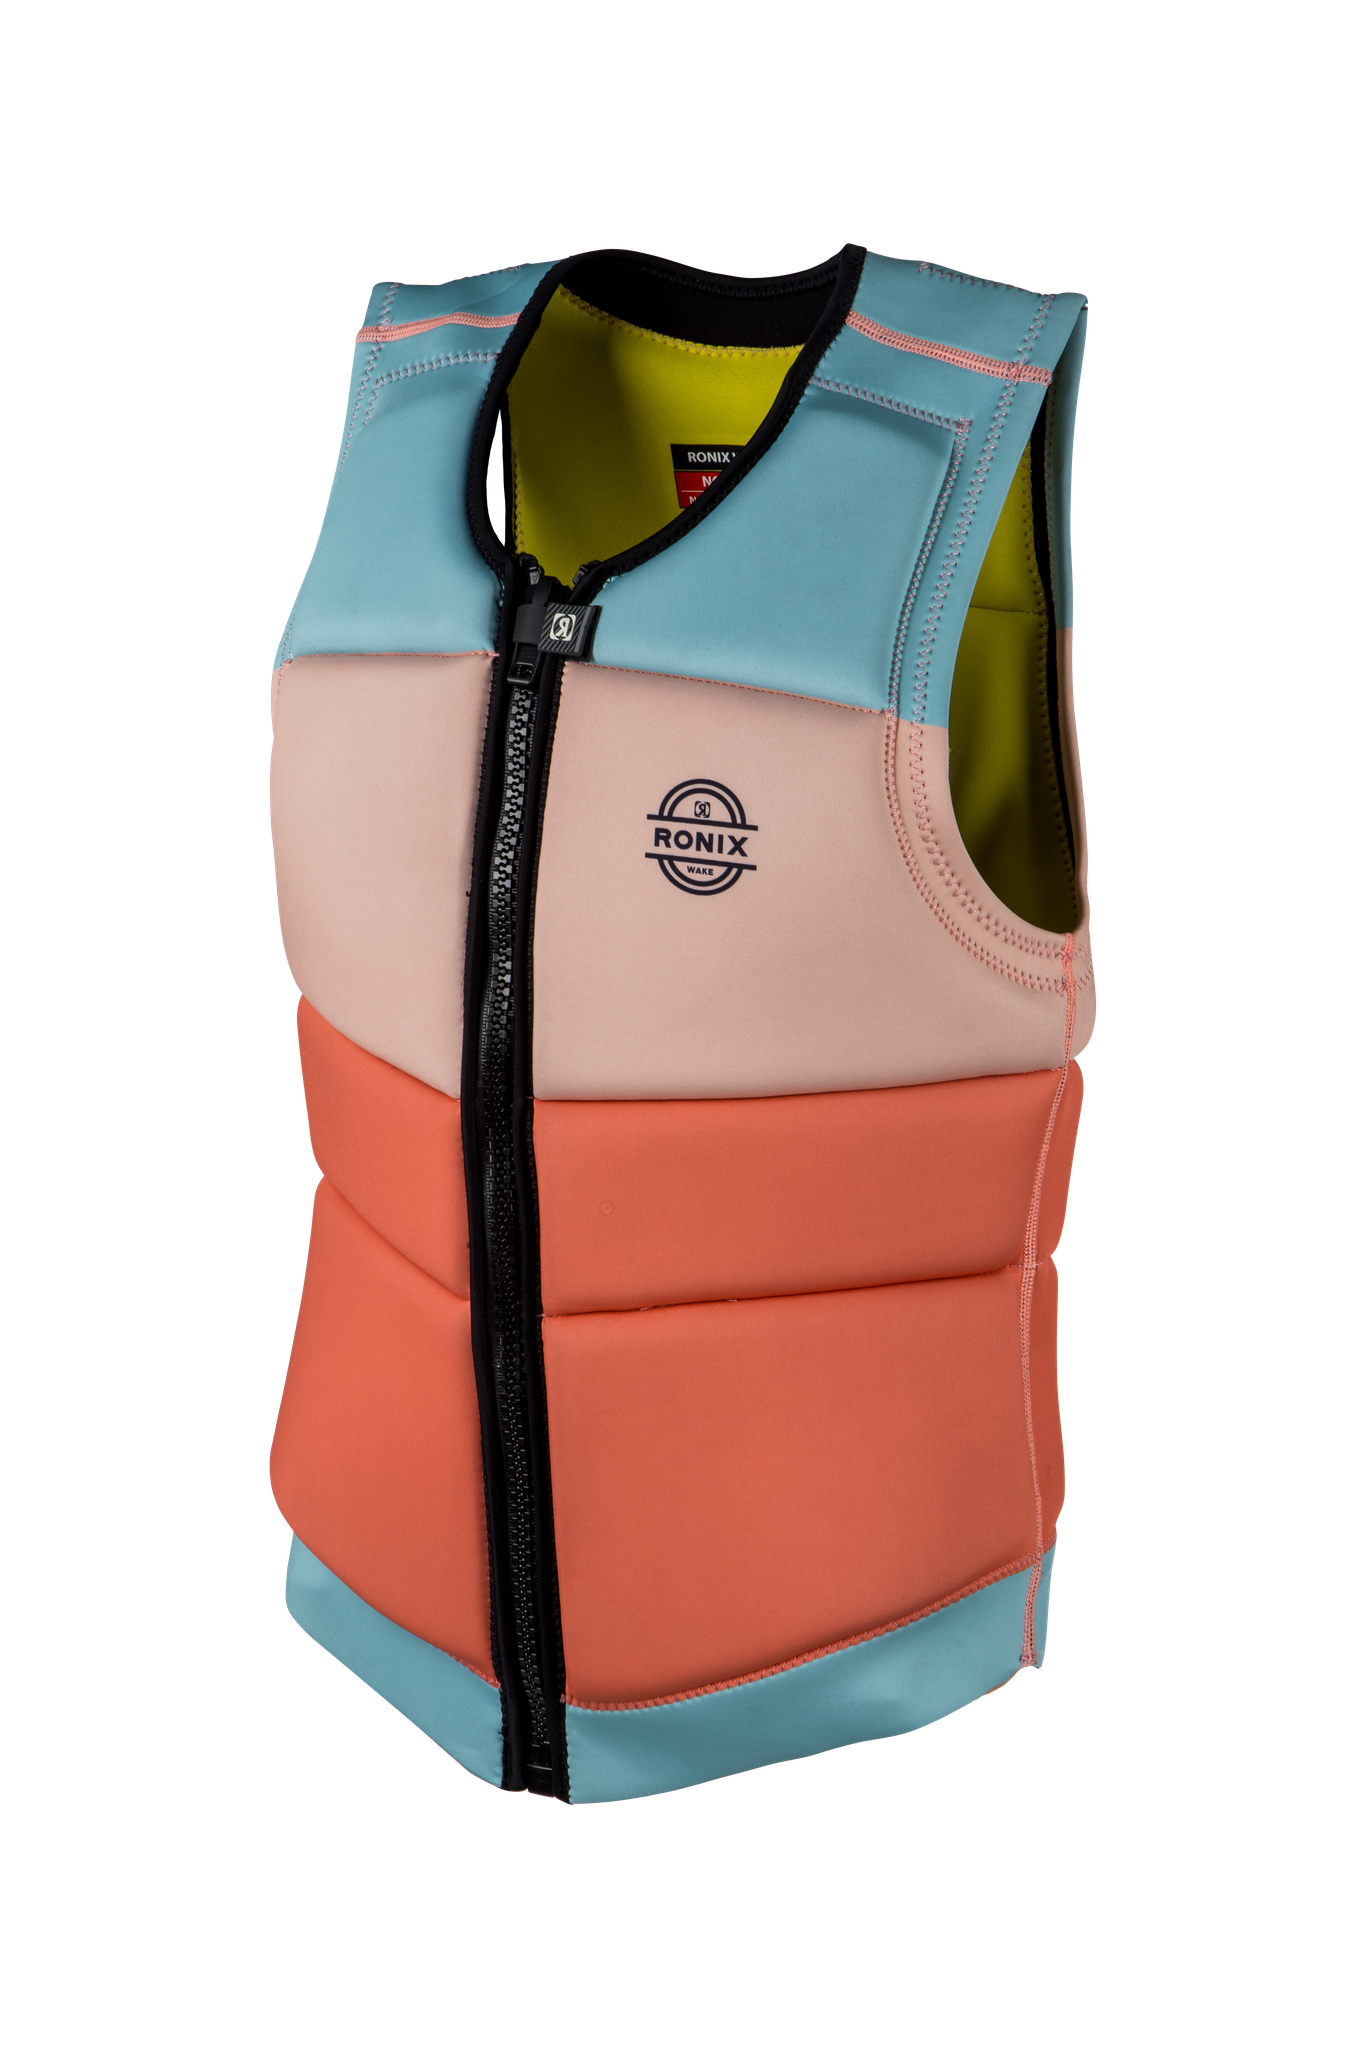 This Ronix 2023 Coral Women's CE Impact Vest, designed by Ronix, features a vibrant pink, blue, and yellow color scheme. Designed with flex foam for maximum comfort, this impact jacket provides optimal safety and buoyancy.